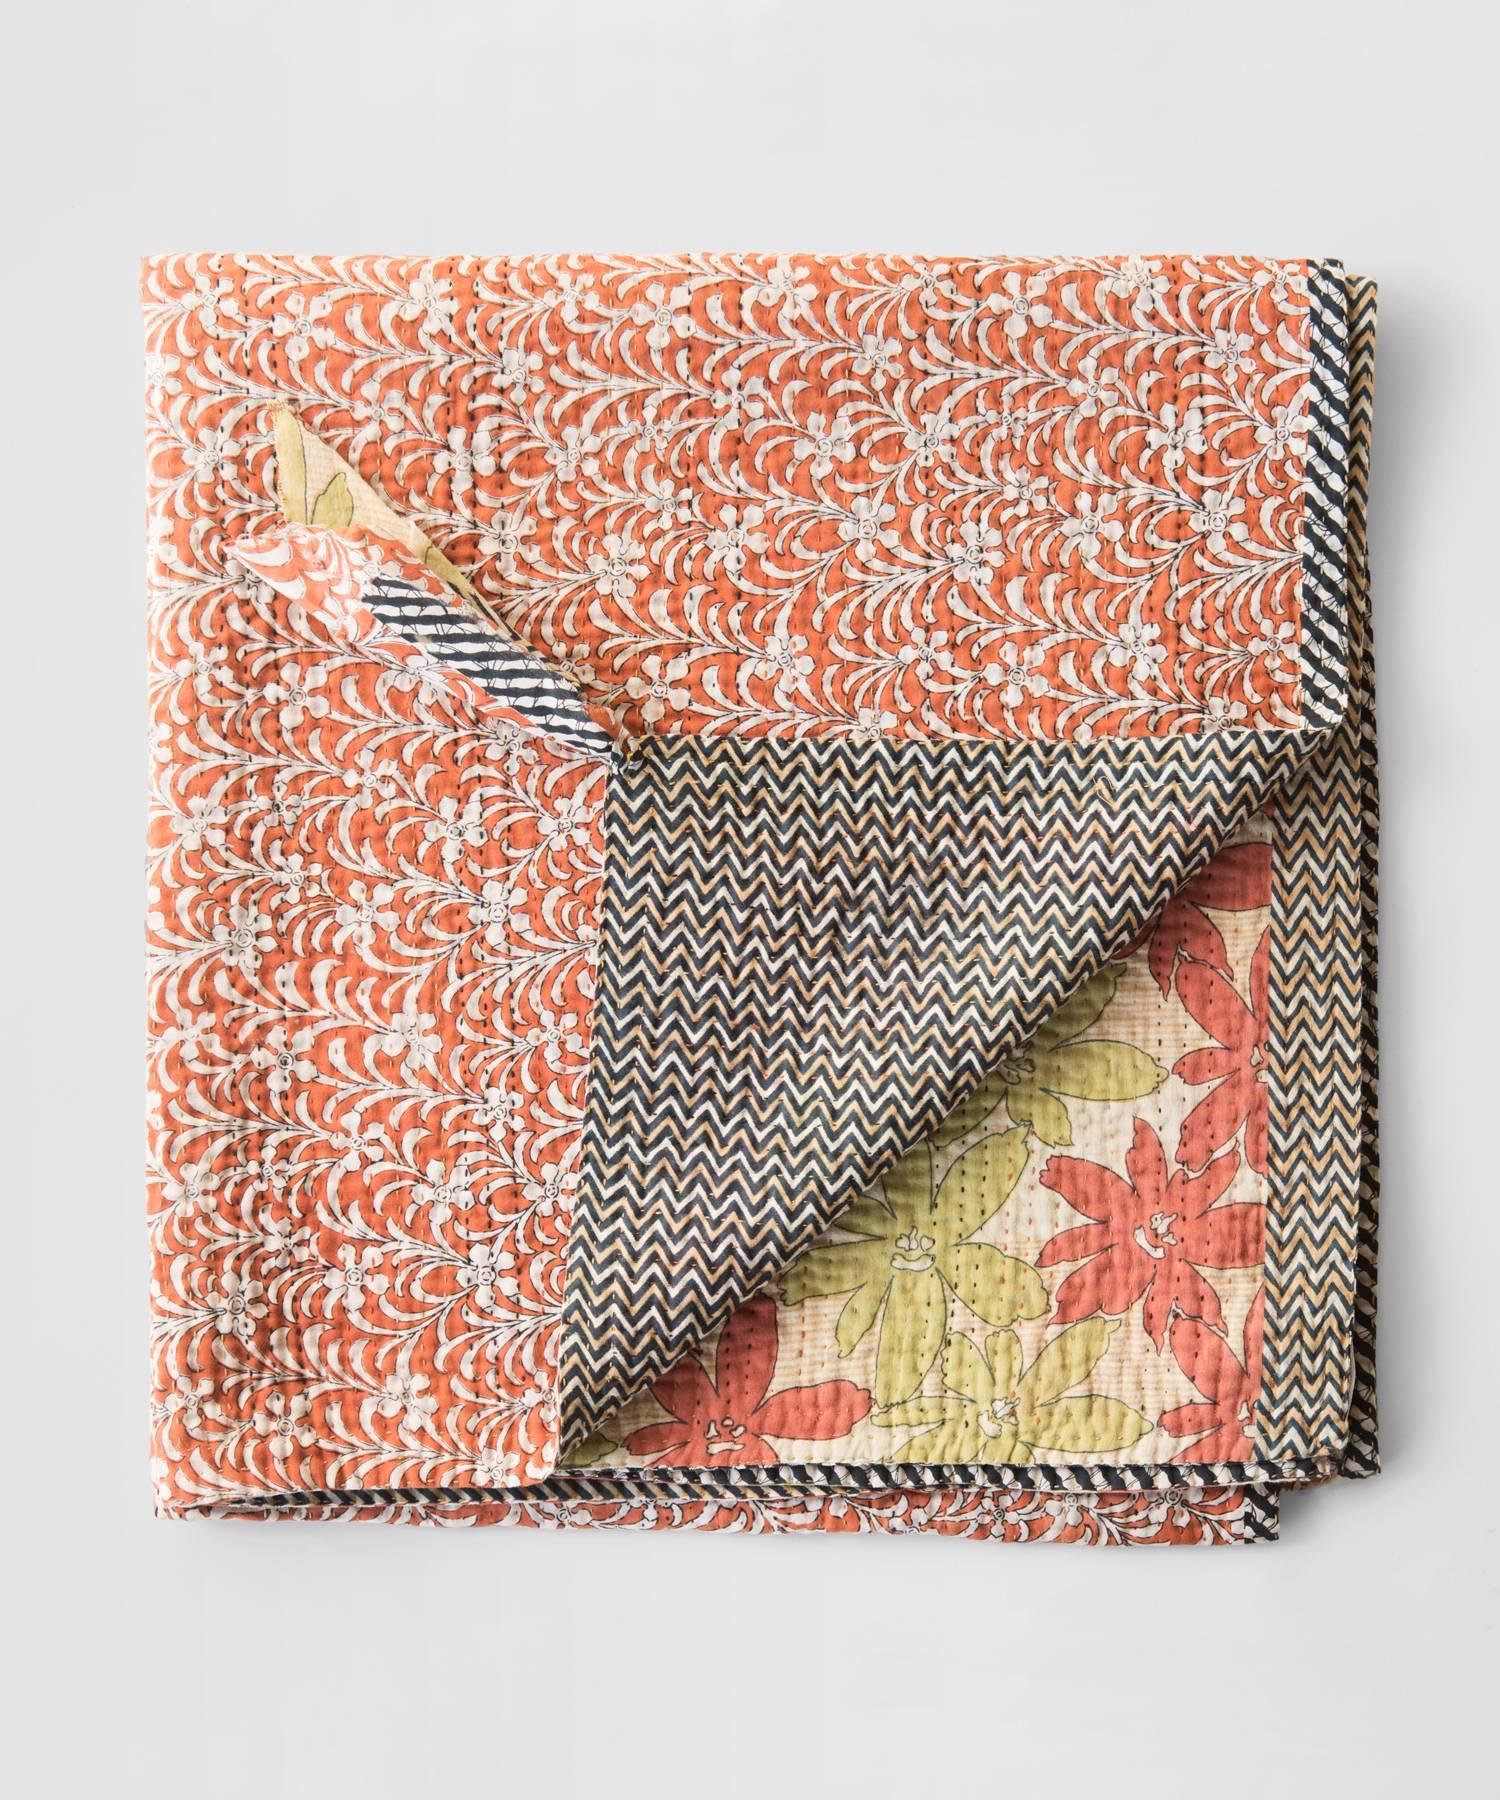 Kantha quilt made from a patchwork of layers of cotton sari joined by a simple running stitch that produces a rippled effect. Each piece is unique.